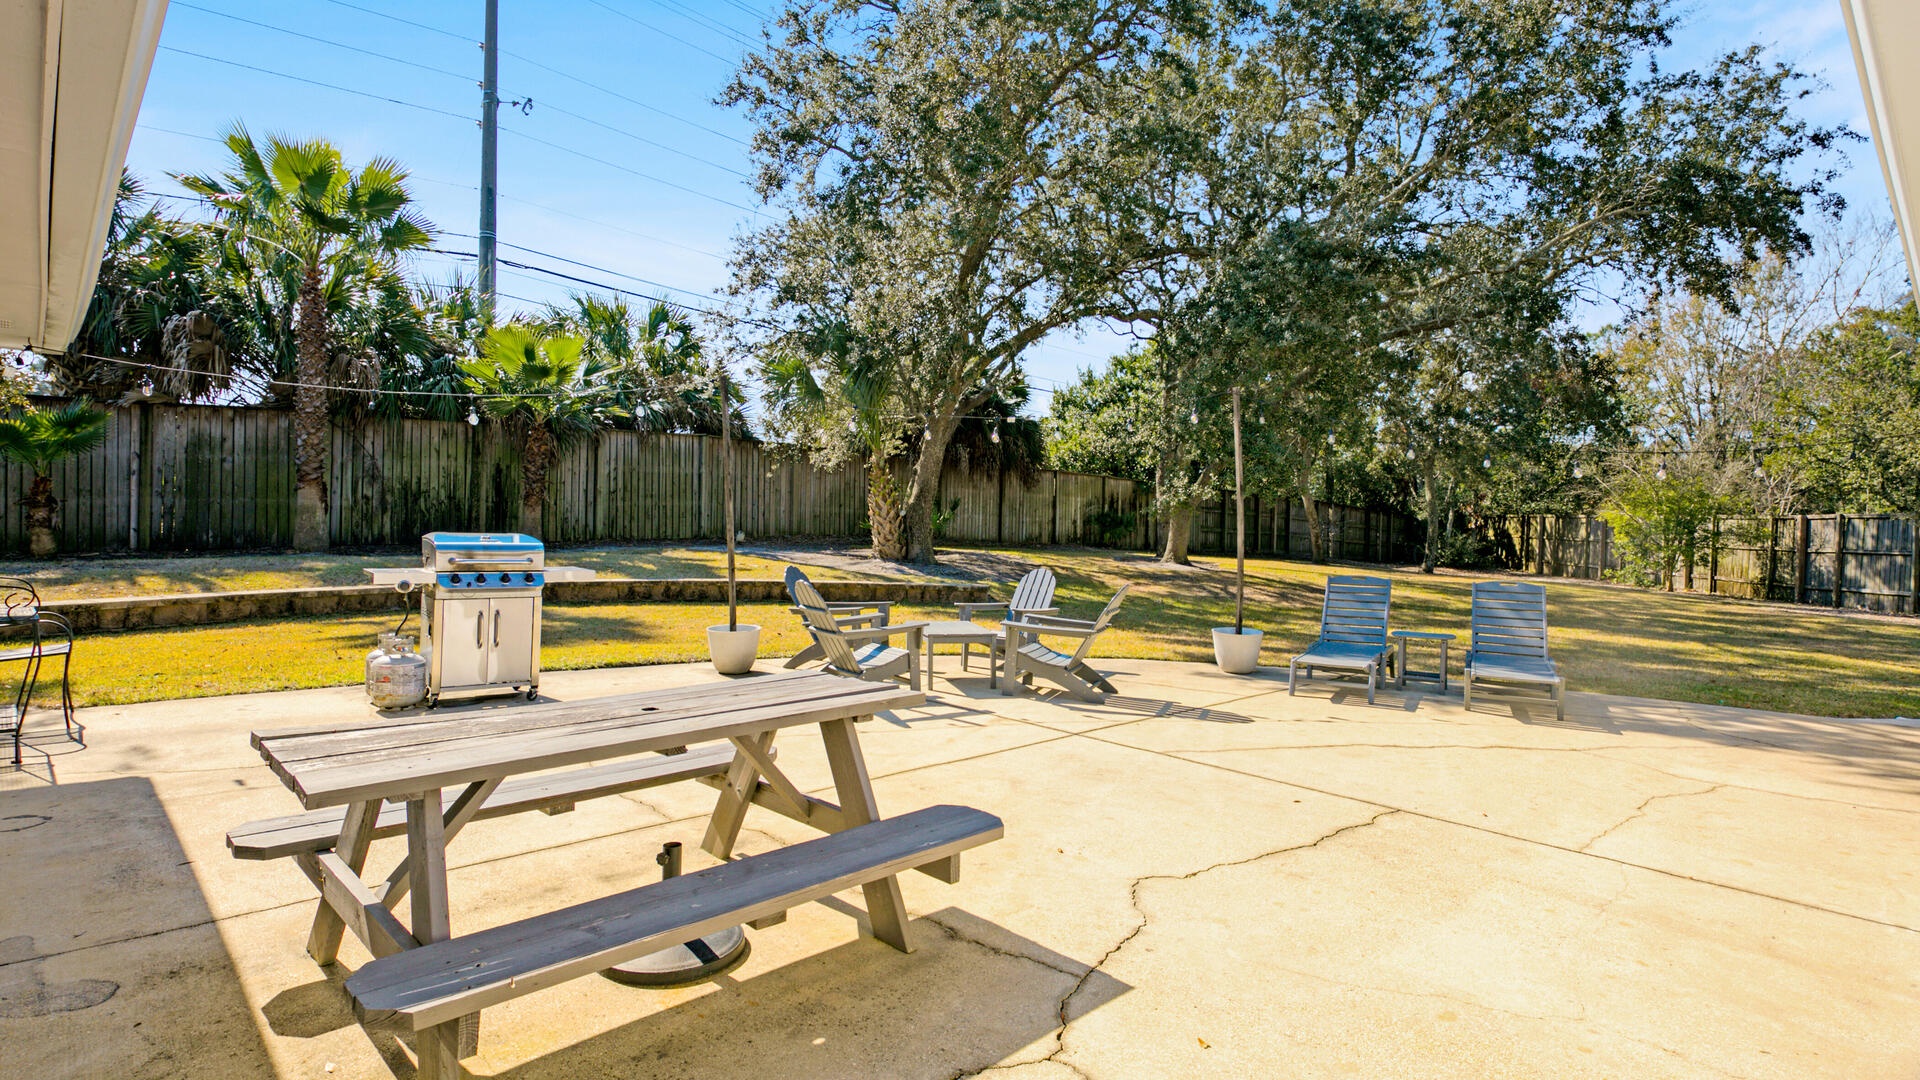 Enjoy grilling, outdoor meals and relaxation on the back patio!